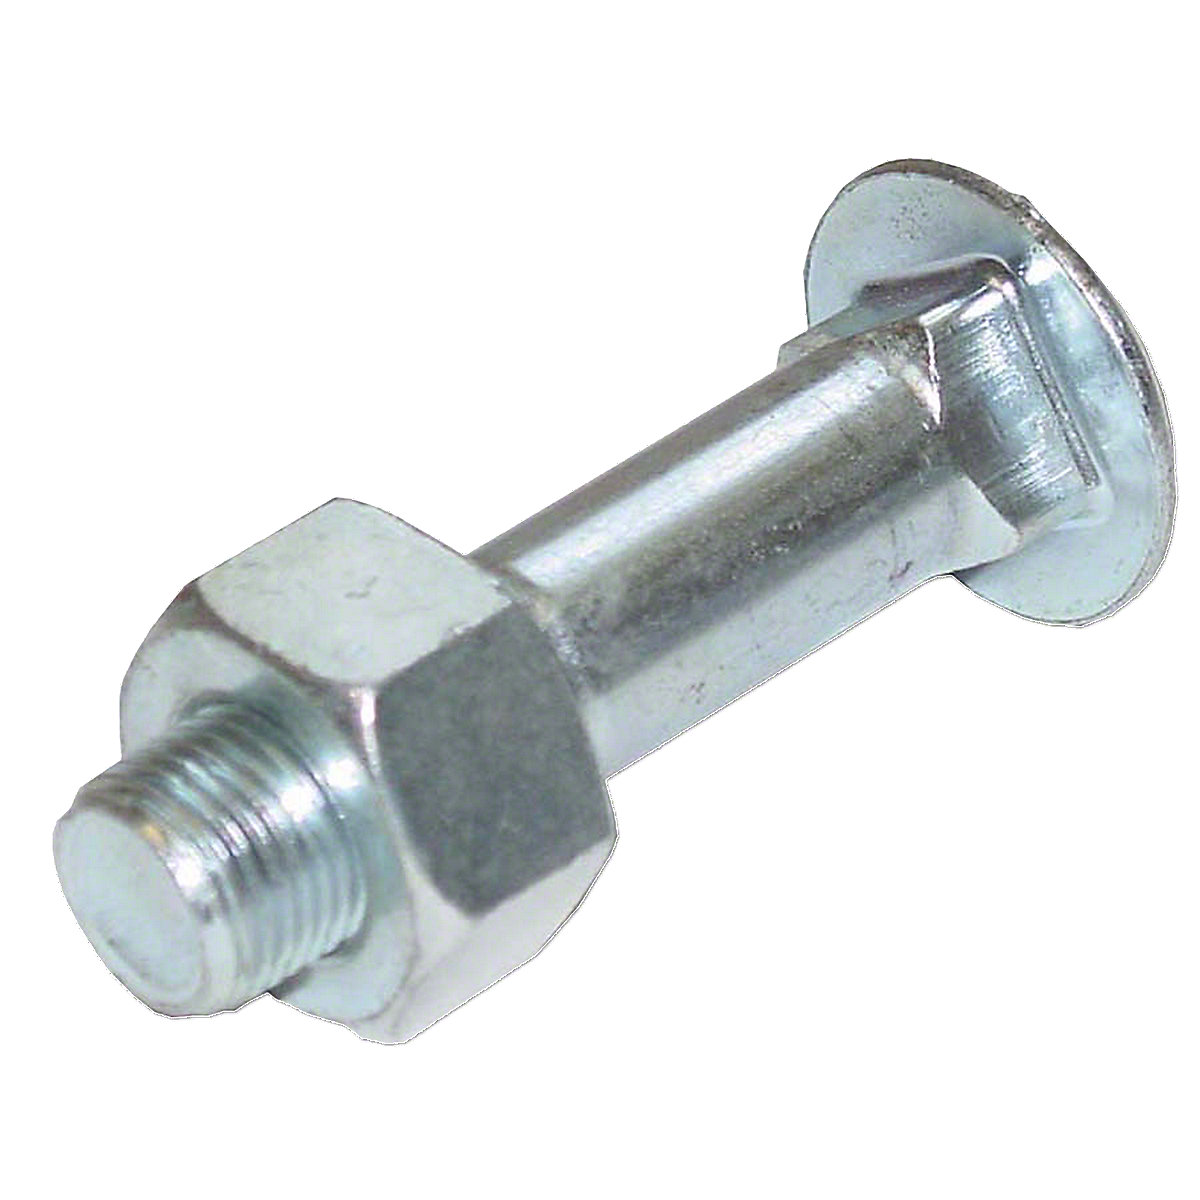 Rim Bolt Assembly For Massey Ferguson: 130, 135, 150, 165, 175, 202, 203, 204, 230, 231, 235, 240, 245, 25, 35, 50, 65, F40, FE35, TE20, TEA20-85, TO20, TO30, TO35, Massey Harris: 50, Colt 21, Mustang 23, Pacer 16, Pony.